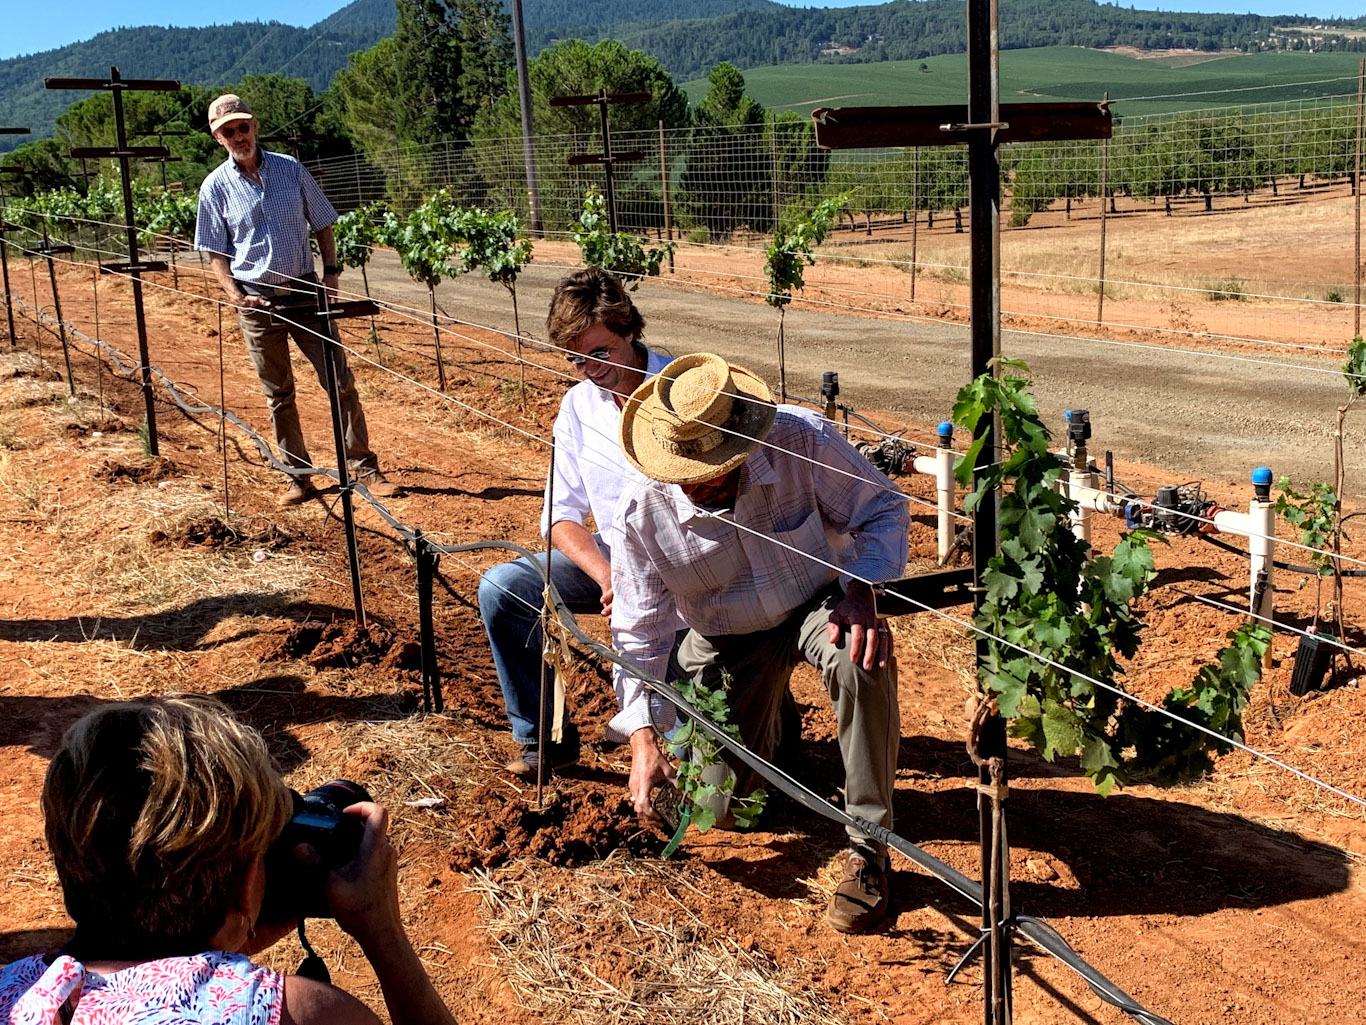 The inaugural planting of the control vines (Cabernet Sauvignon clone 8/St. George).